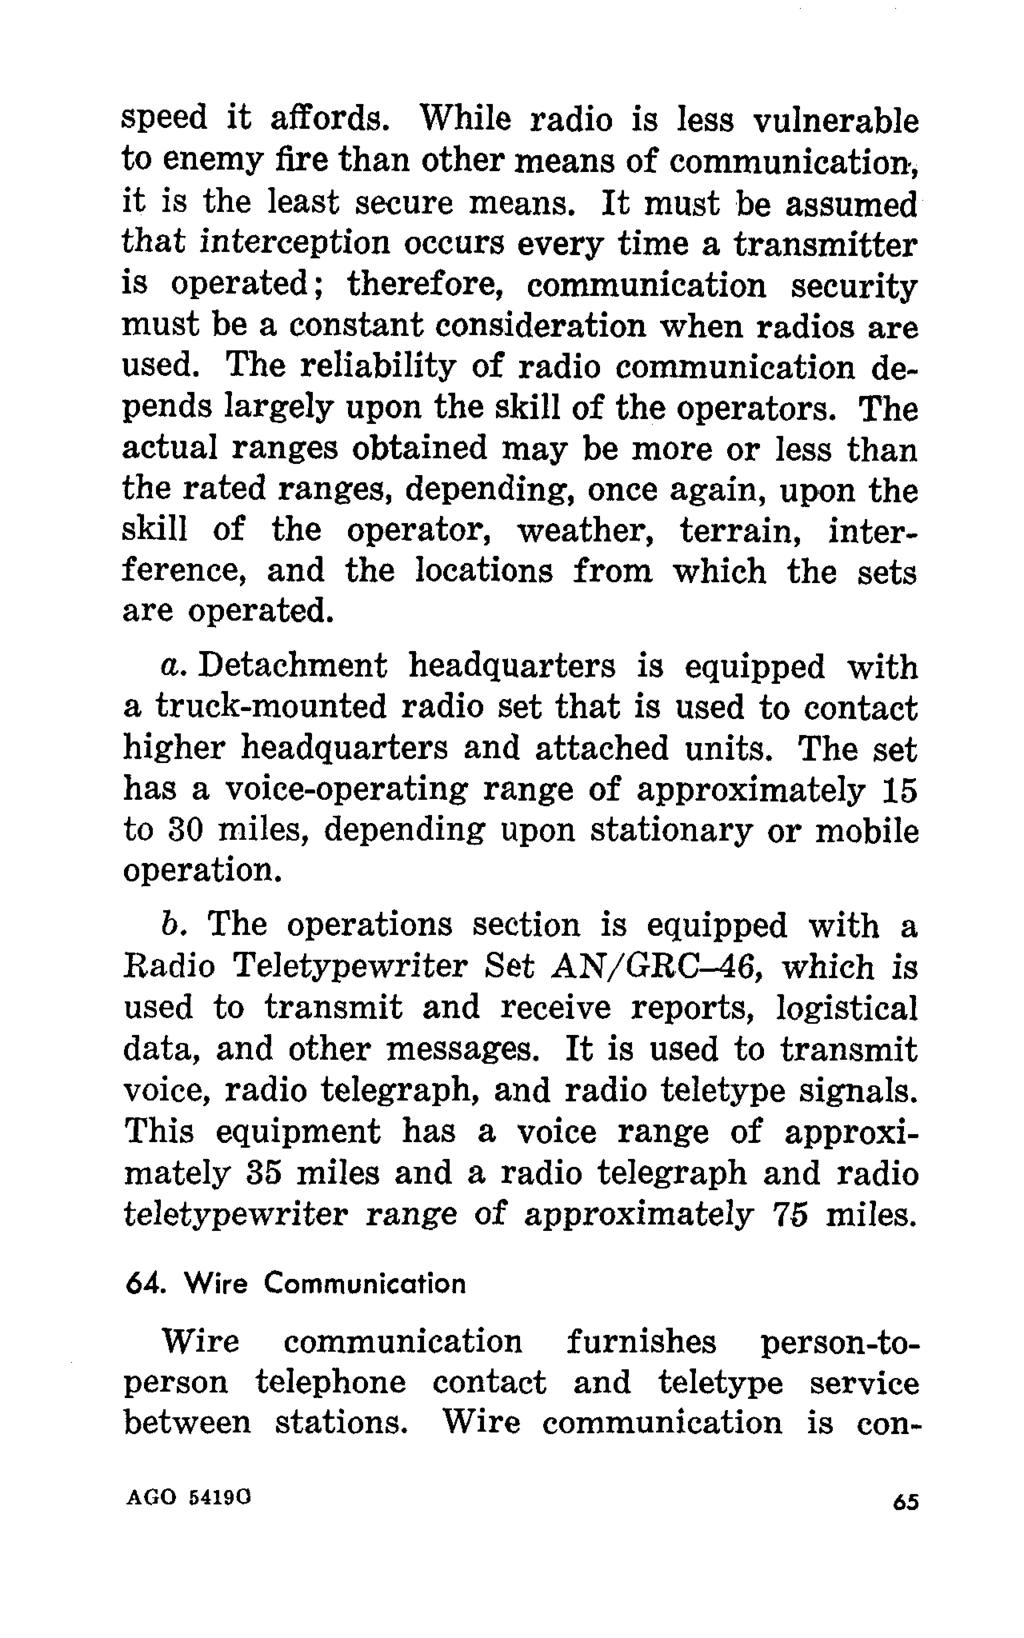 speed it affords. While radio is less vulnerable to enemy fire than other means of communication, it is the least secure means.